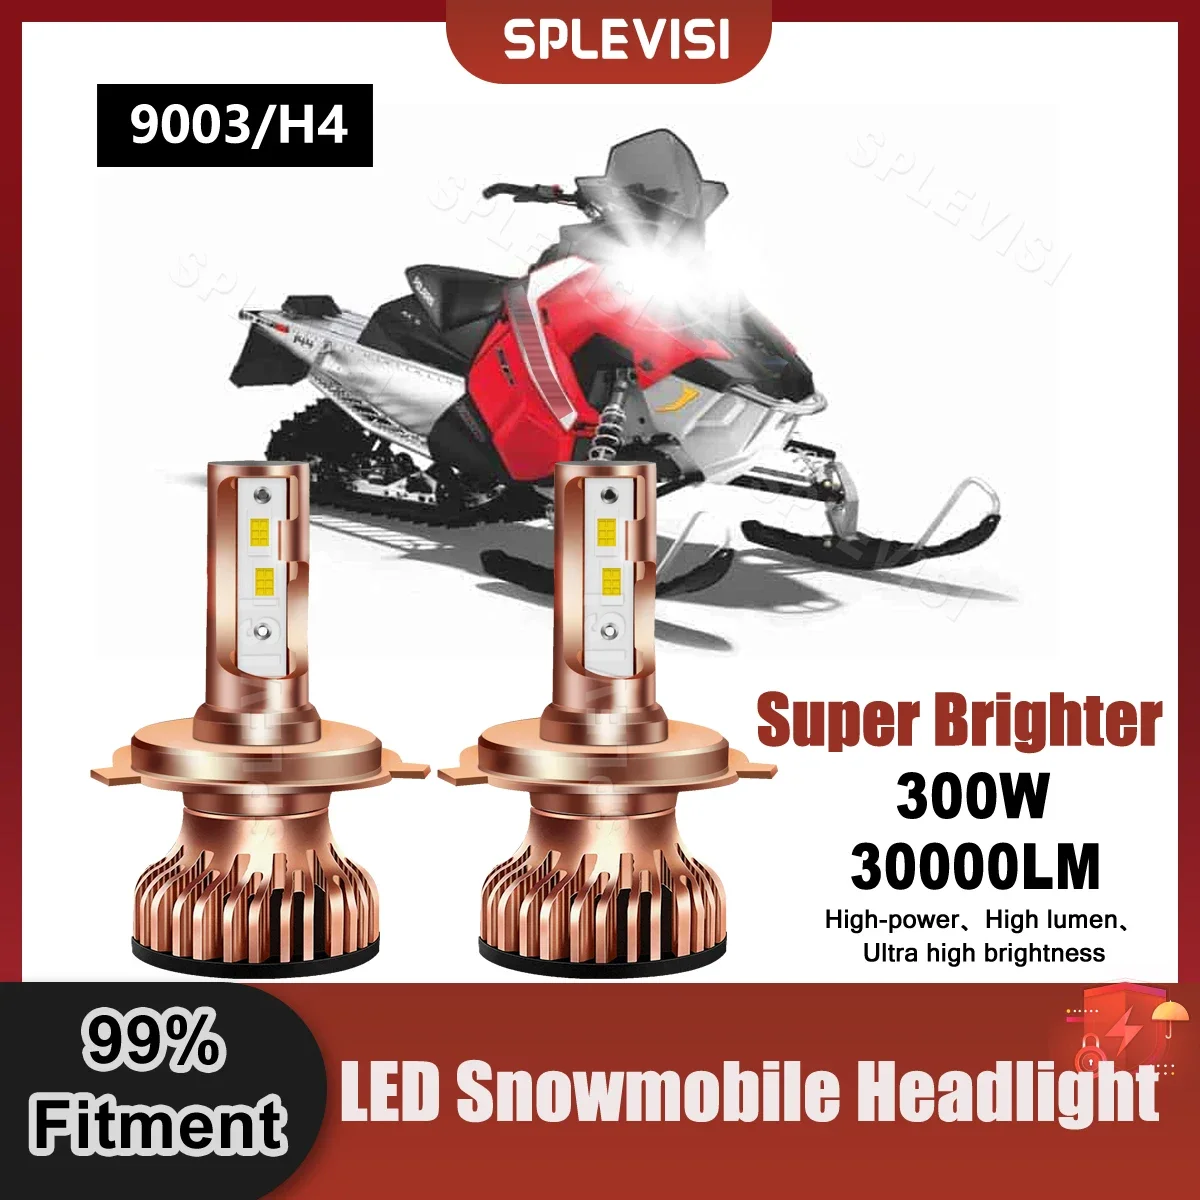 SPLEVISI LED Headlight Bulbs 6000K Pure White 300W For Polaris Switch Back 800 2009 2010 2011 2012 2013 2014 Motorcycle Bulbs headlight adjustment switch for vw tiguan 2010 2019 5nd941333a